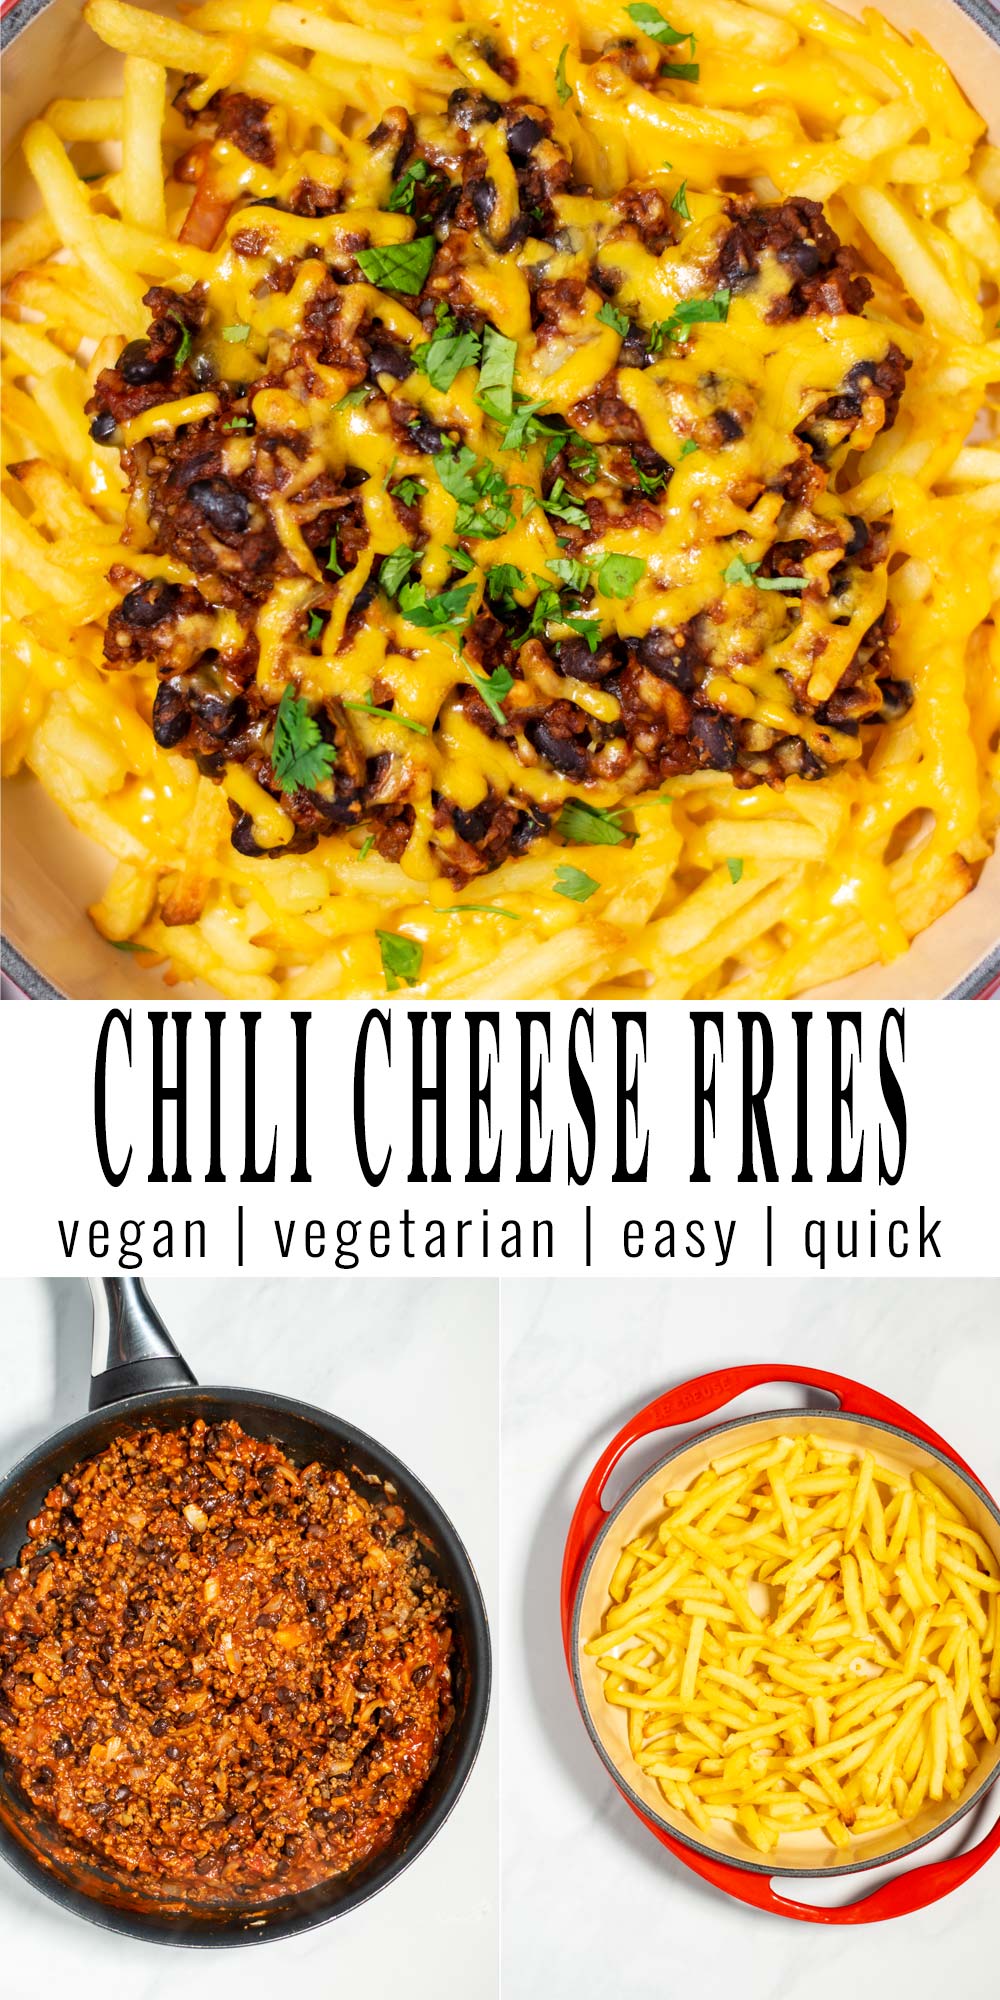 Collage of two pictures of Chili Cheese Fries with recipe title text.